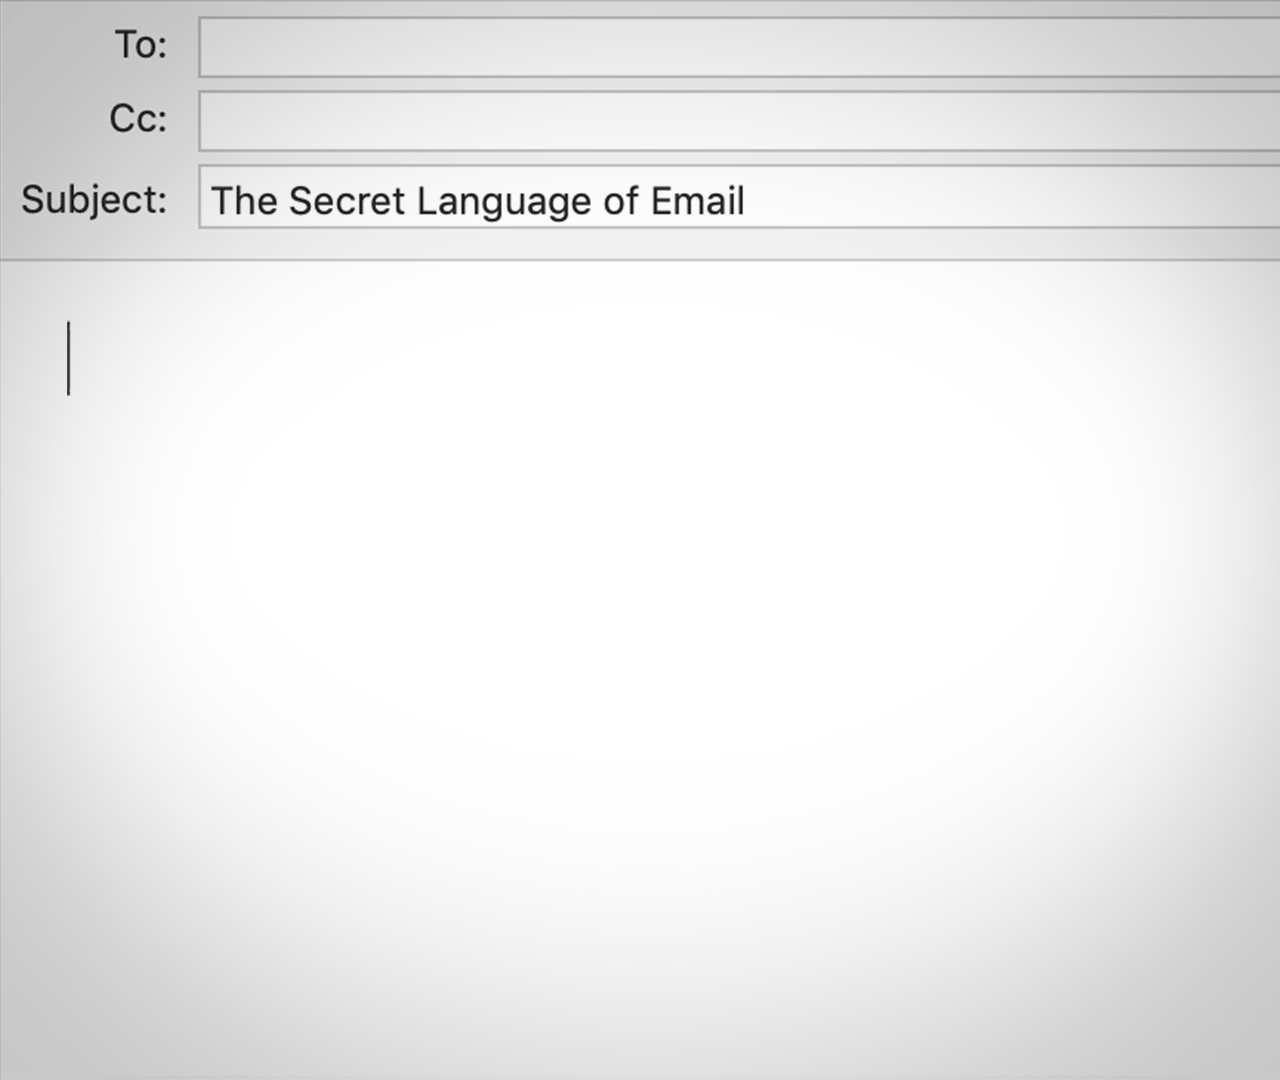 The Secret Language of Email